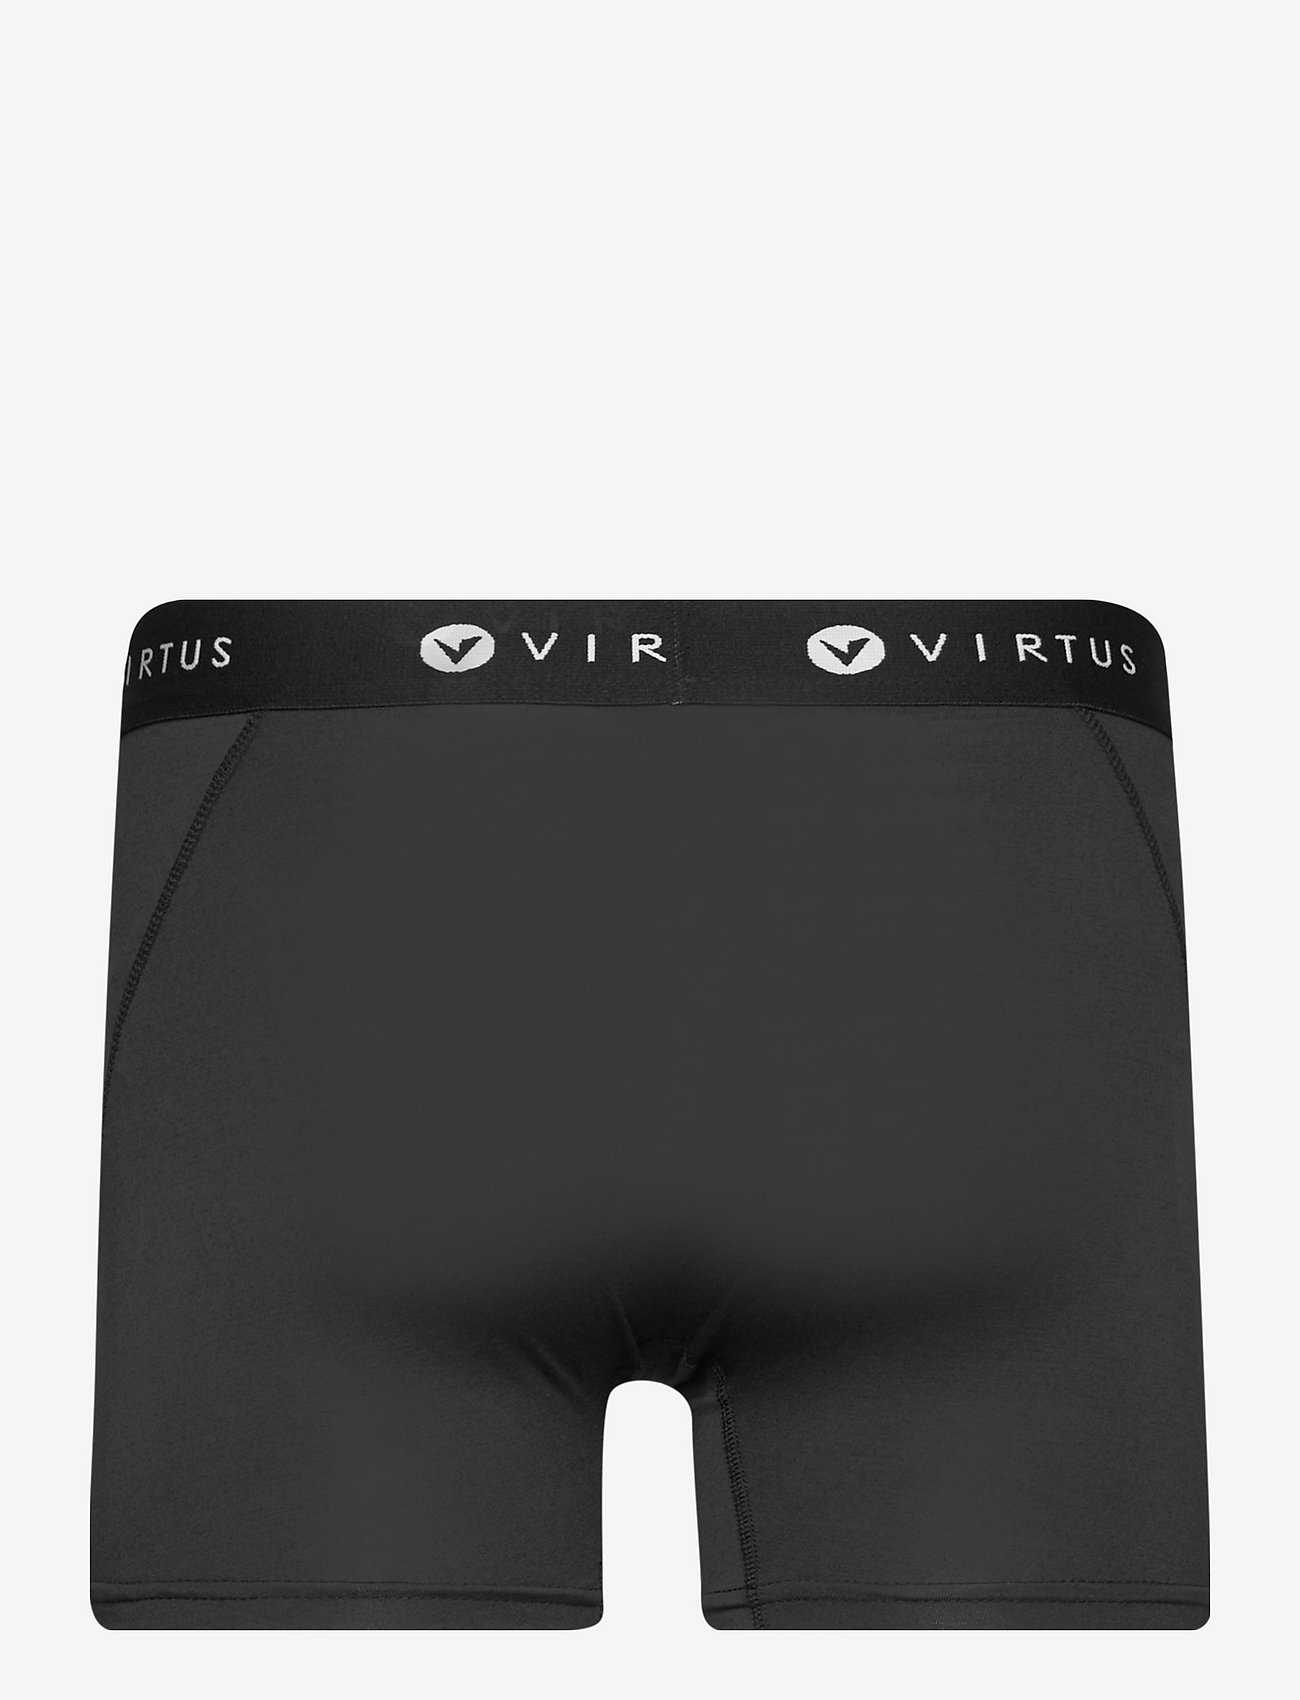 Virtus - Tuch M Boxer Shorts 1-Pack - lowest prices - 1001 black - 1